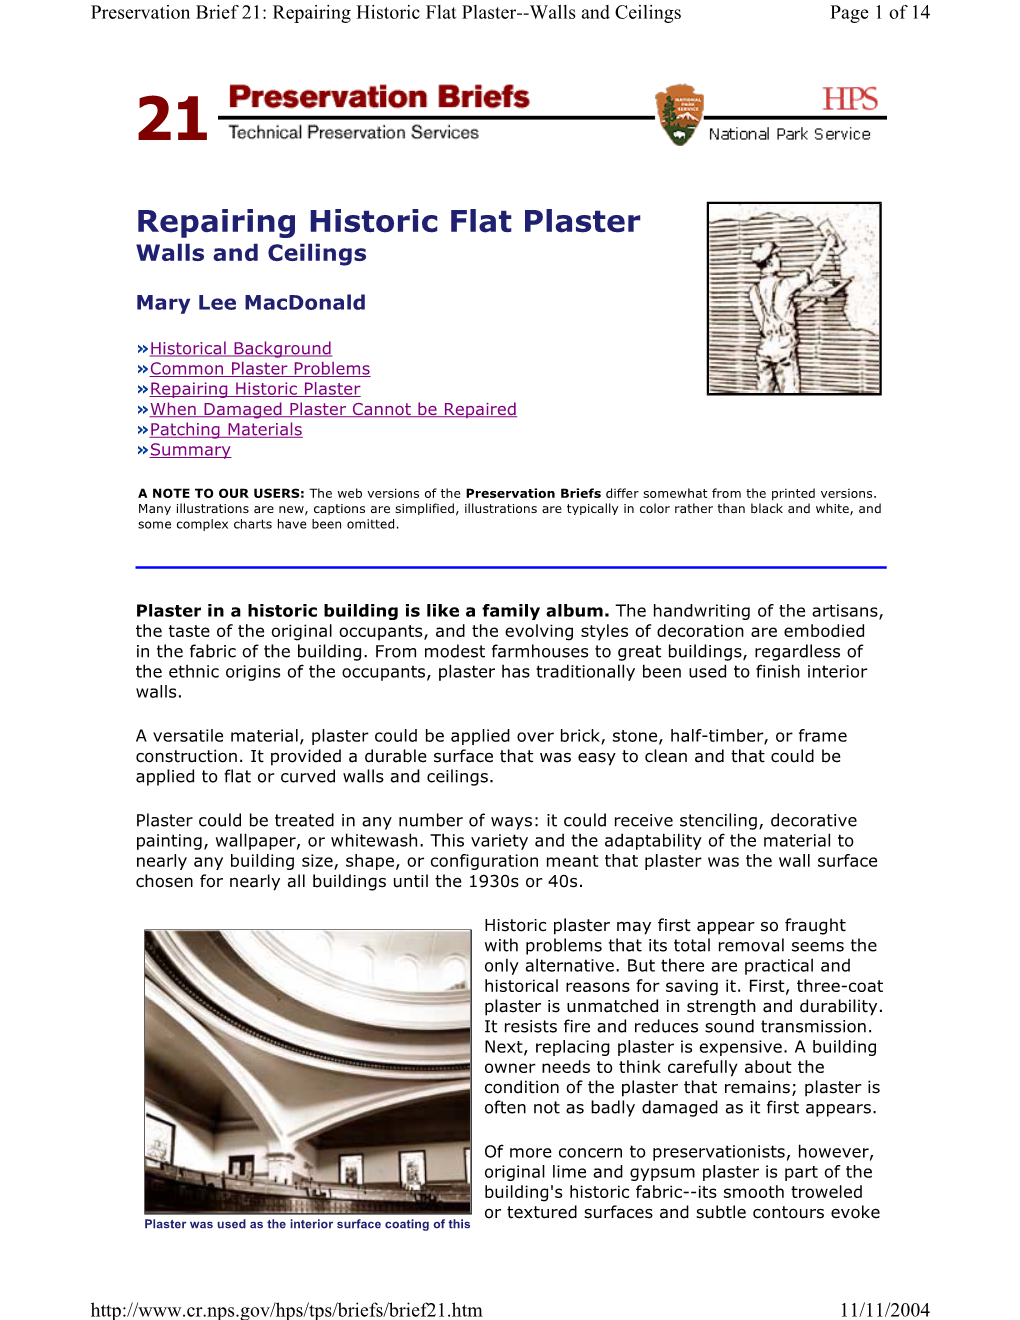 Repairing Historic Flat Plaster--Walls and Ceilings Page 1 of 14